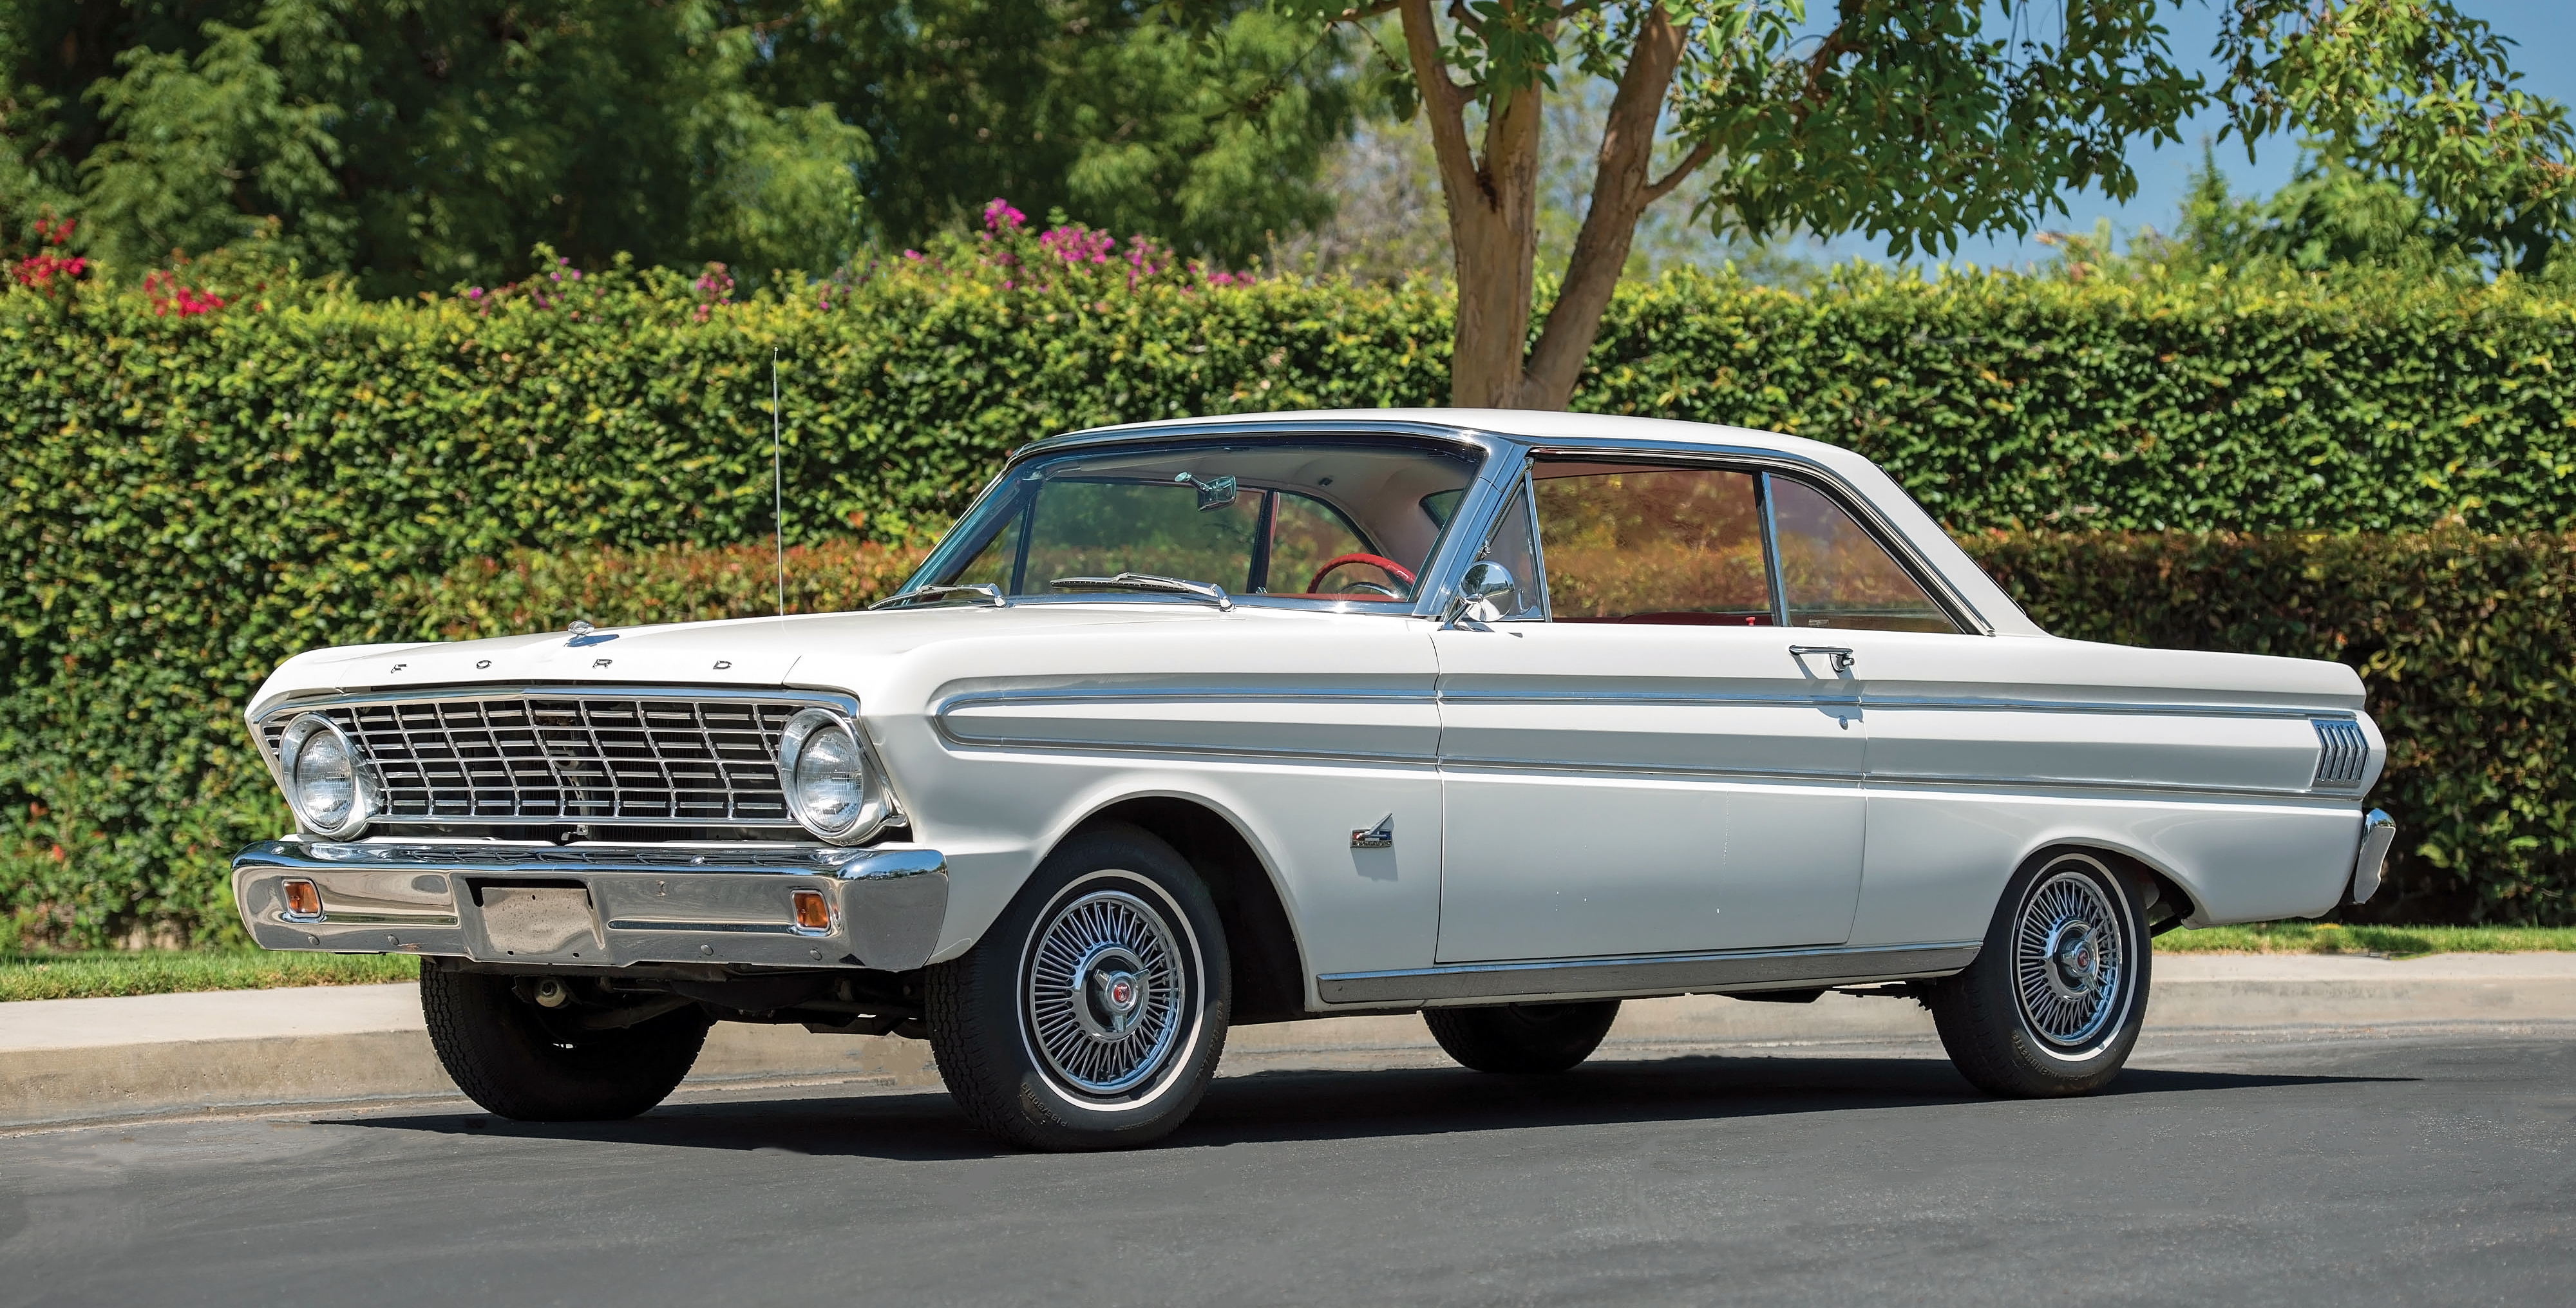 1964 Ford Falcon Base | Hagerty Valuation Tools